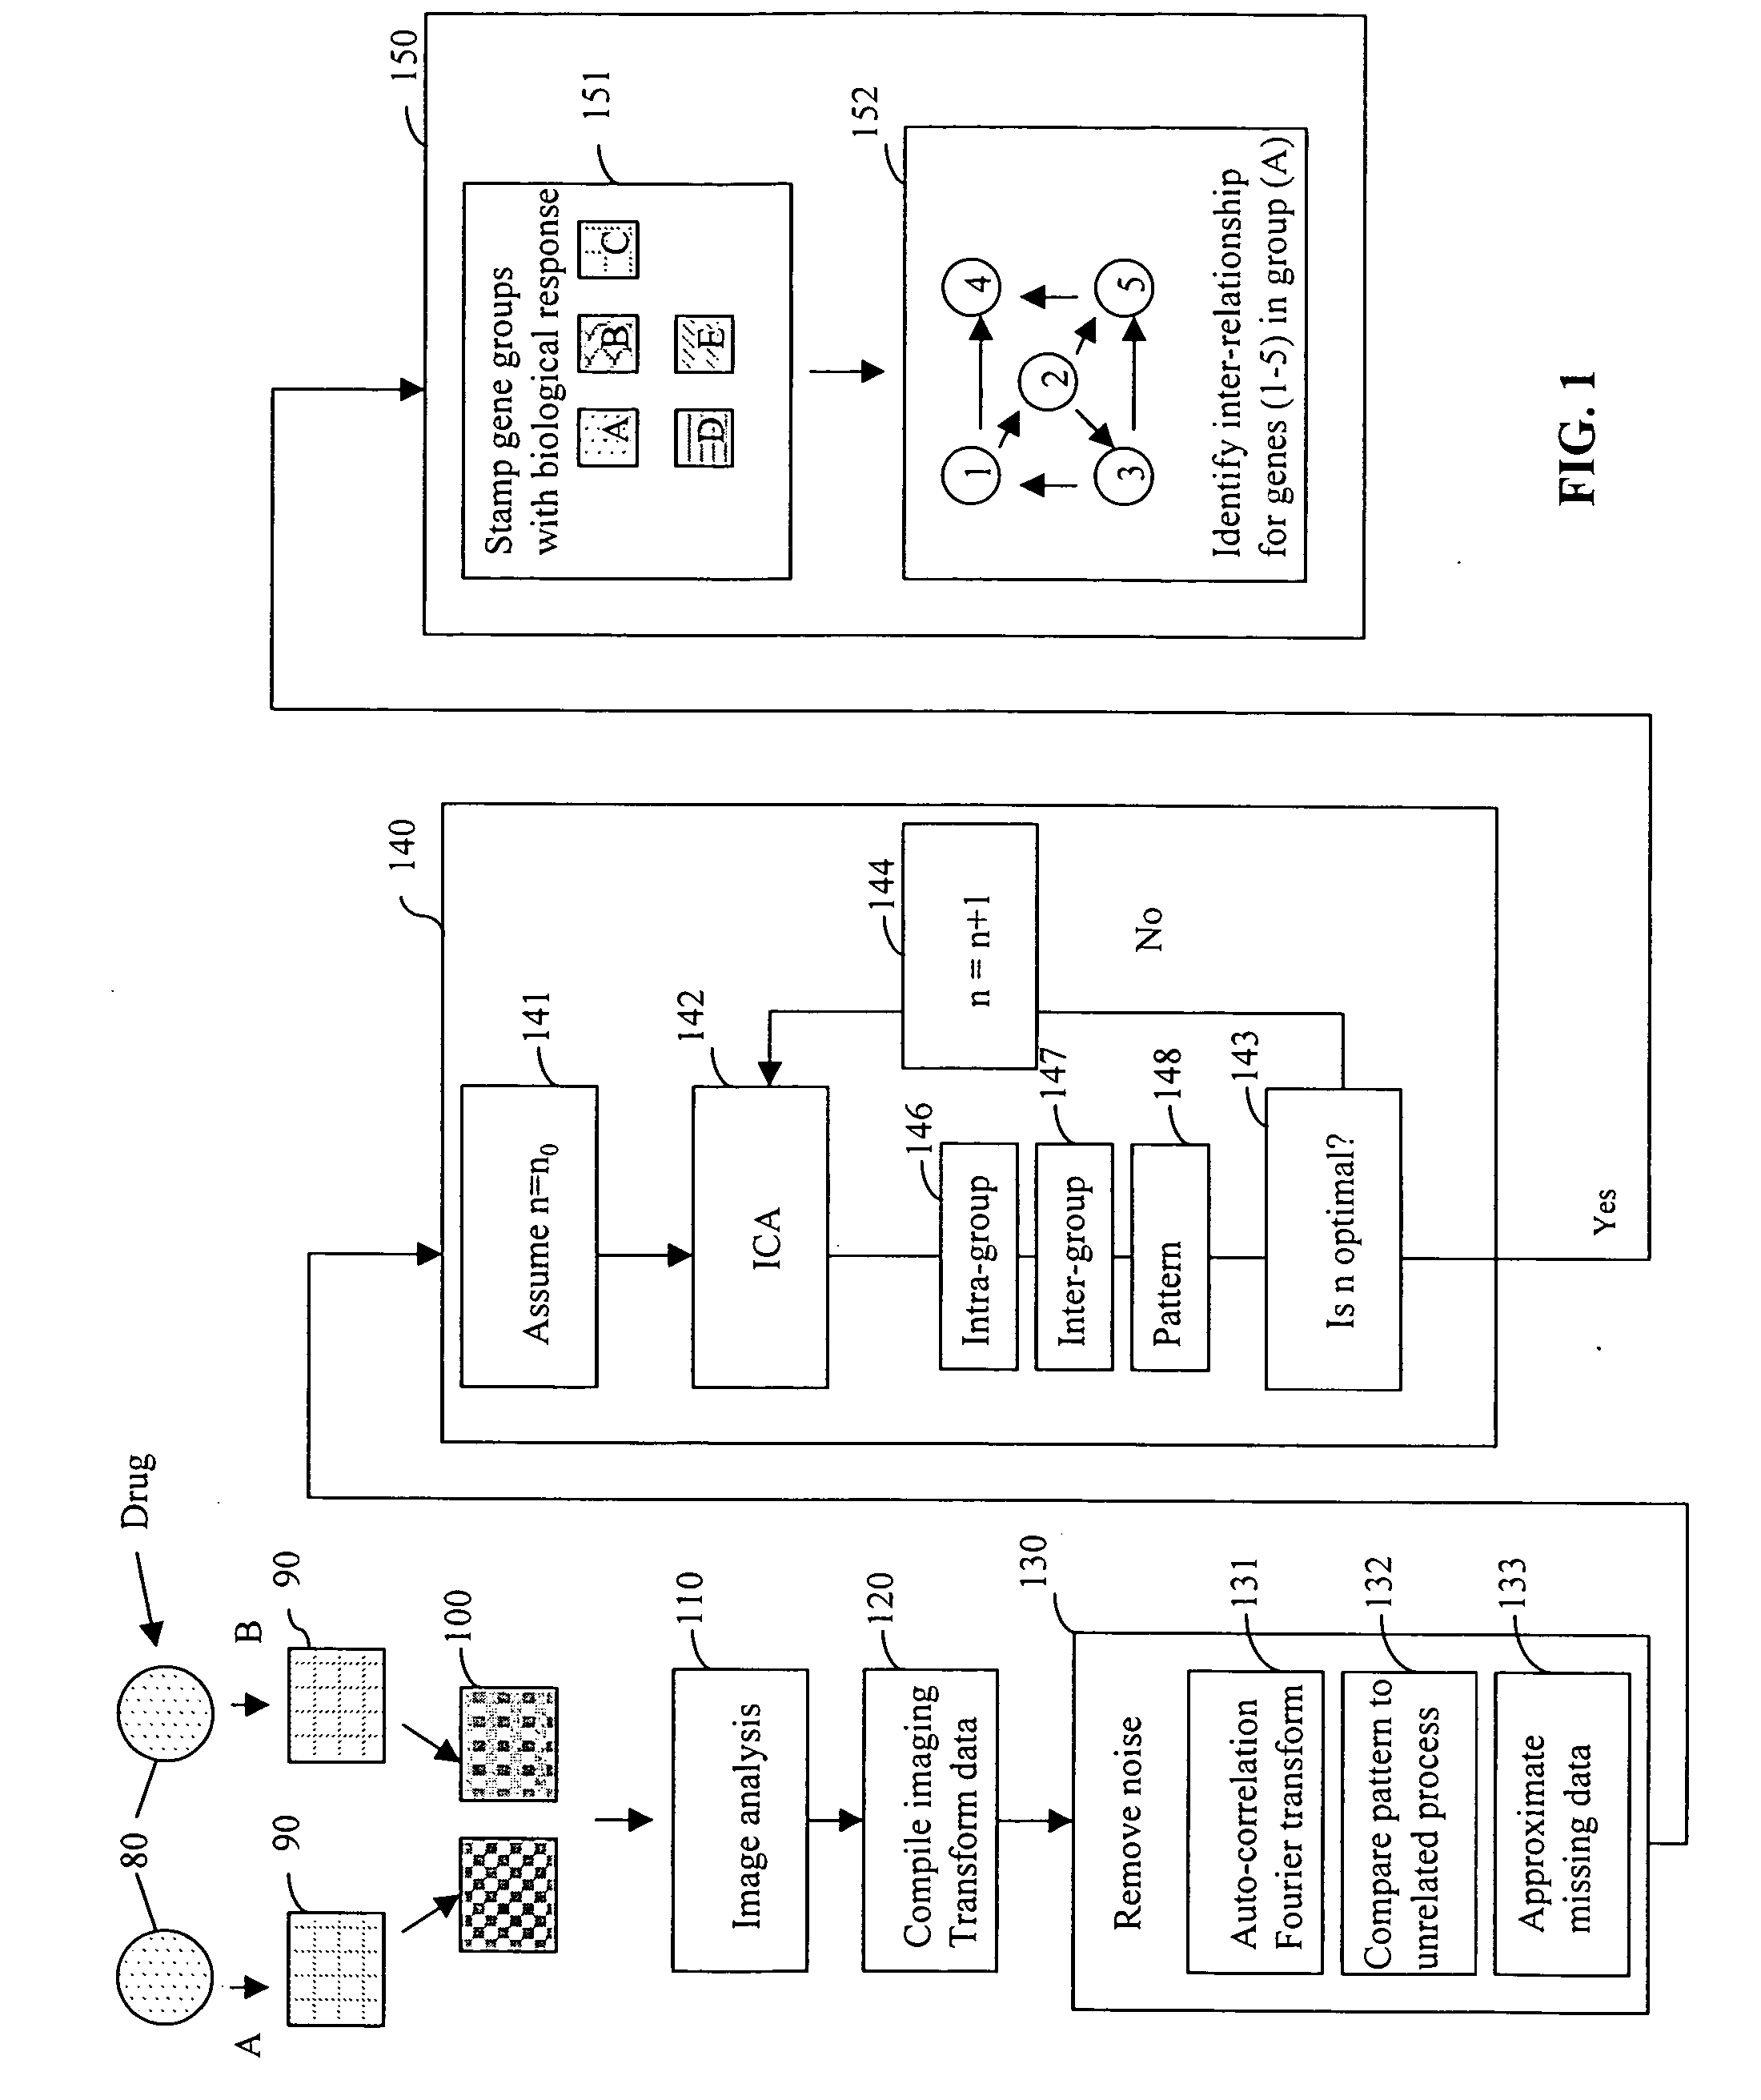 Methods and systems for gene expression array analysis